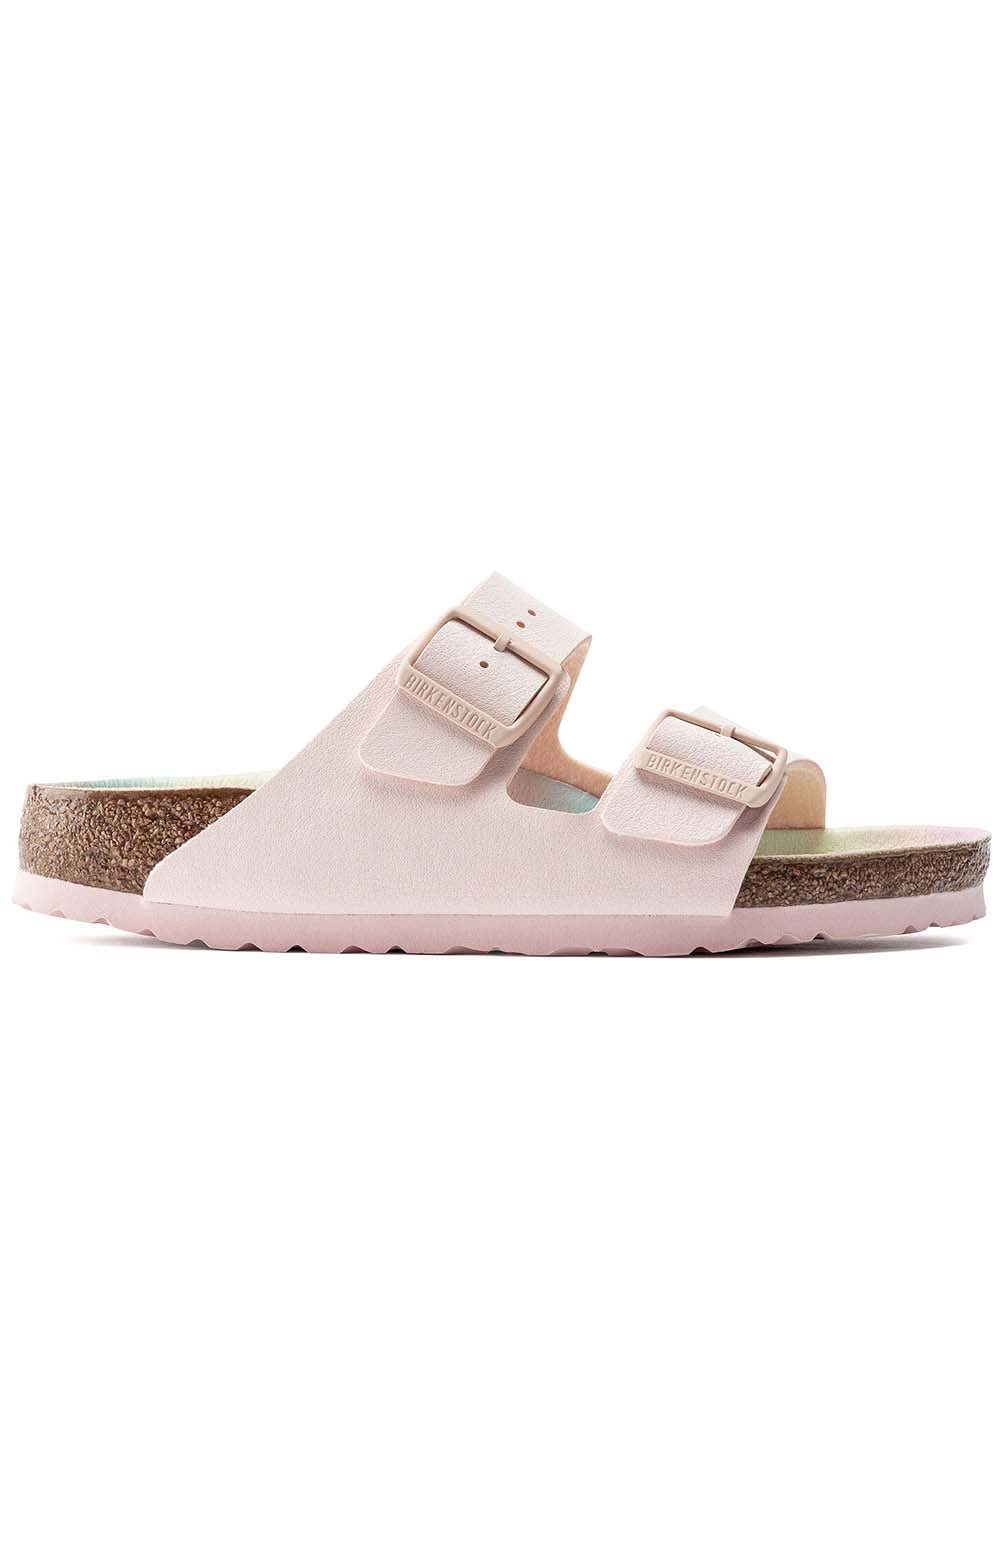  Close-up of the Birkenstock Arizona Vegan Sandals Light Rose BR1022536, highlighting the durable and sustainable materials used